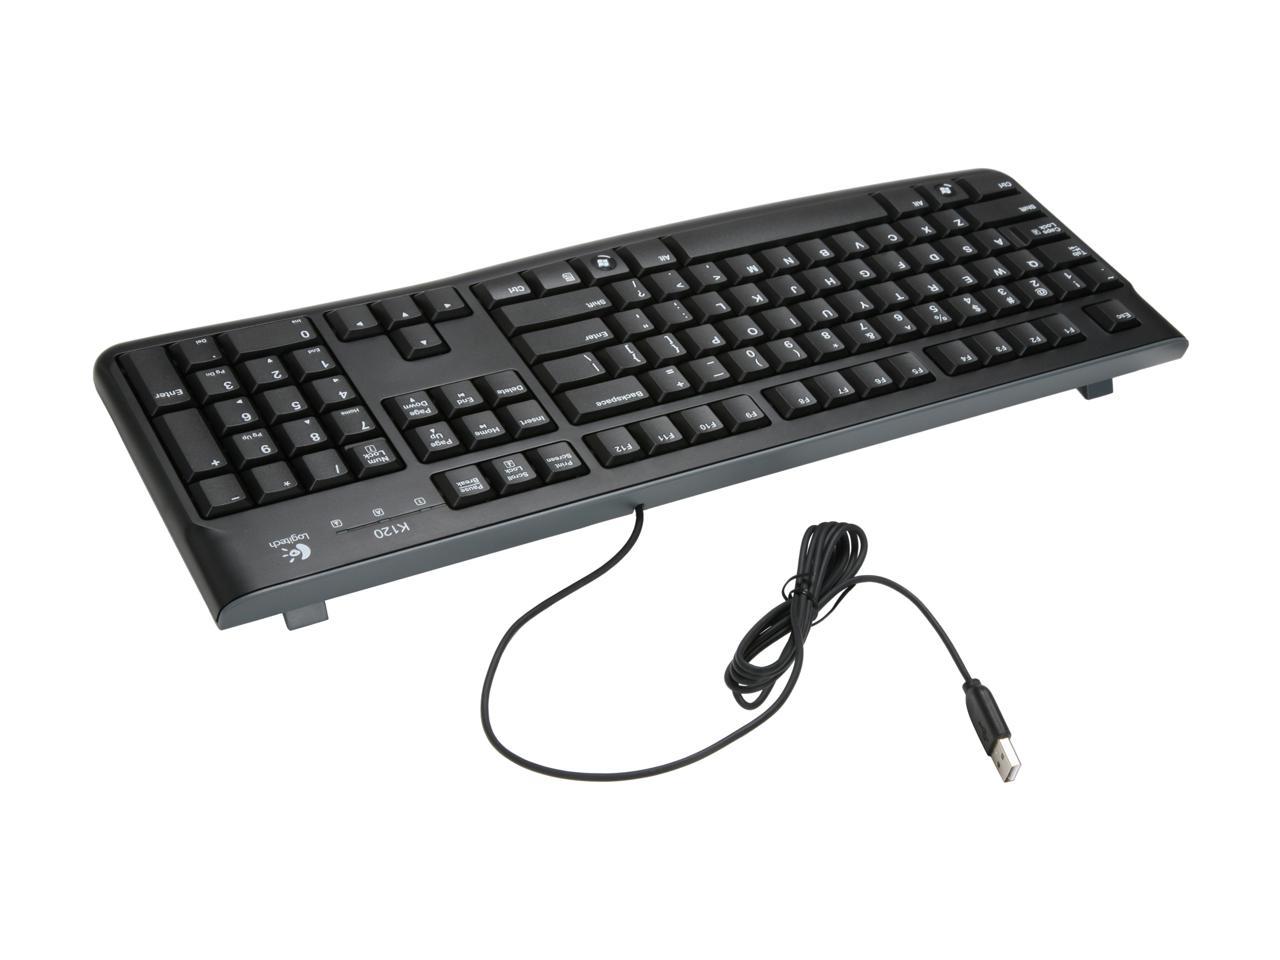 Logitech MK120 Wired USB Keyboard and Mouse - Black